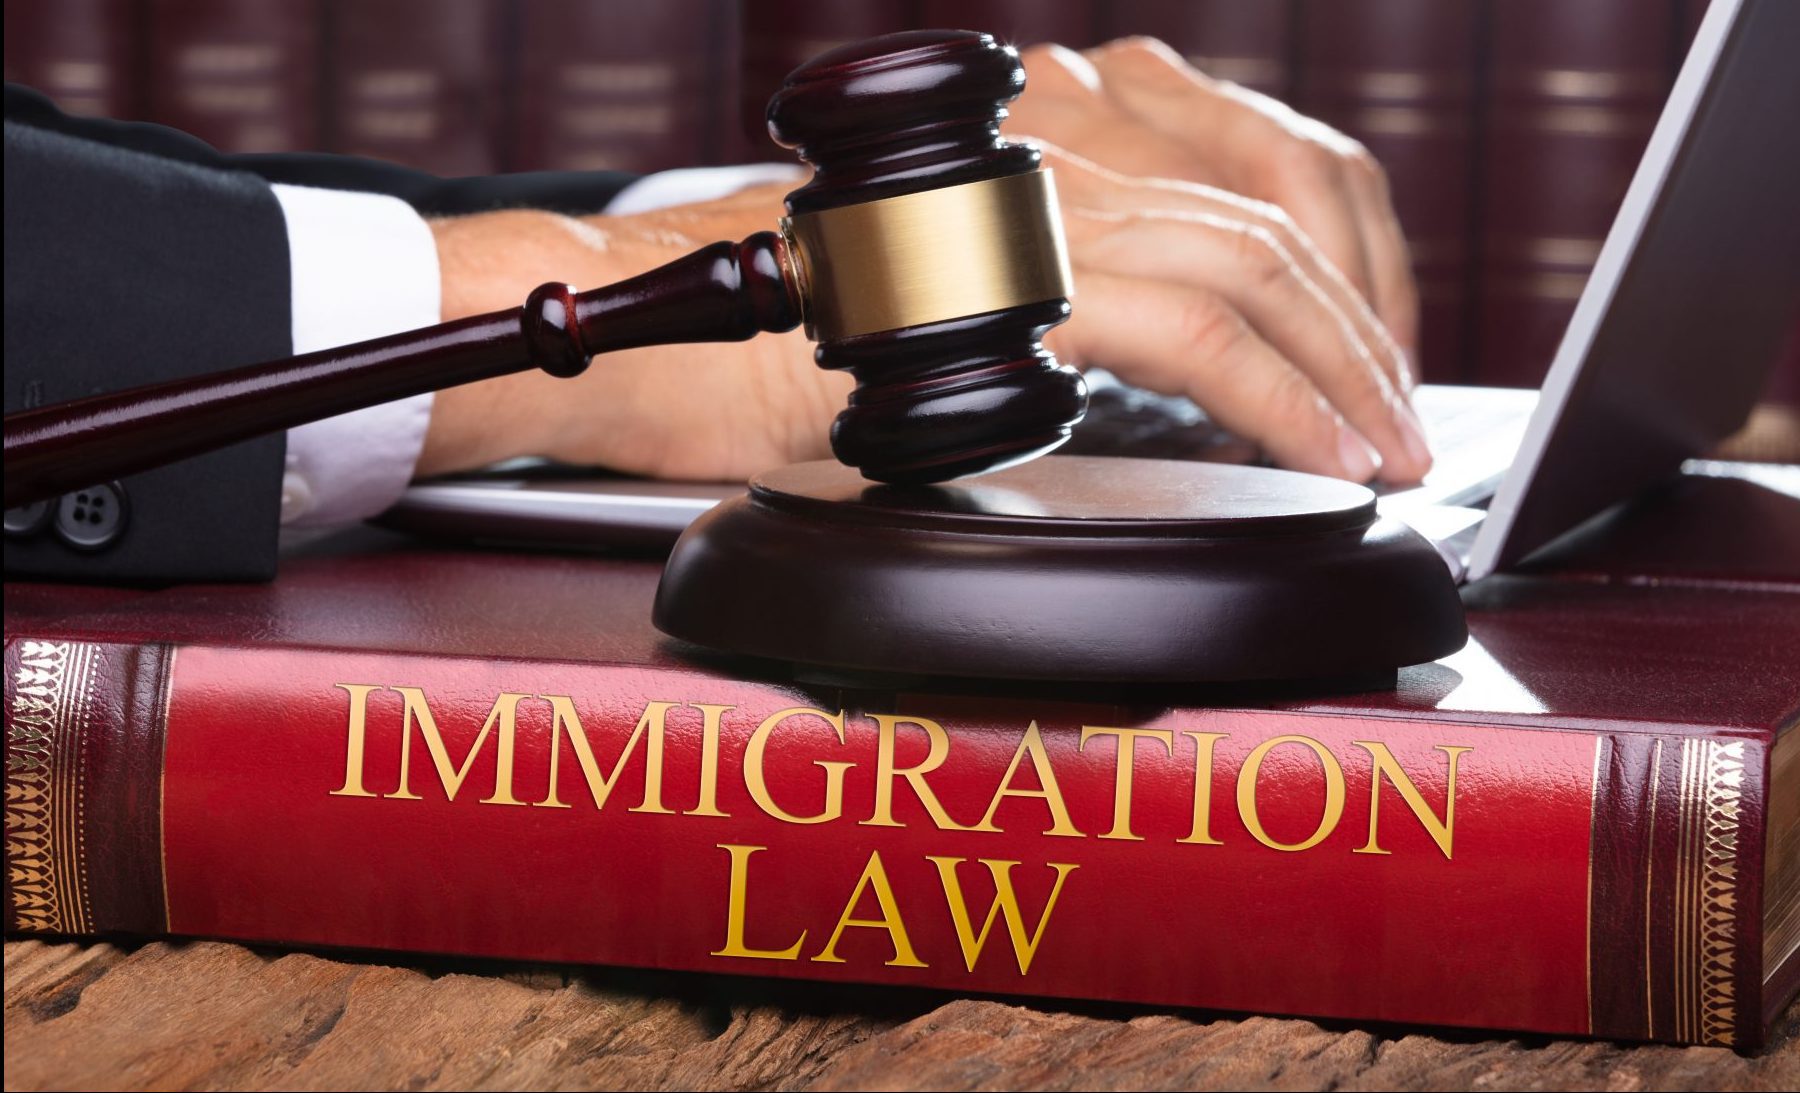 Denver Immigration Court Up and Running with Limited Hearings